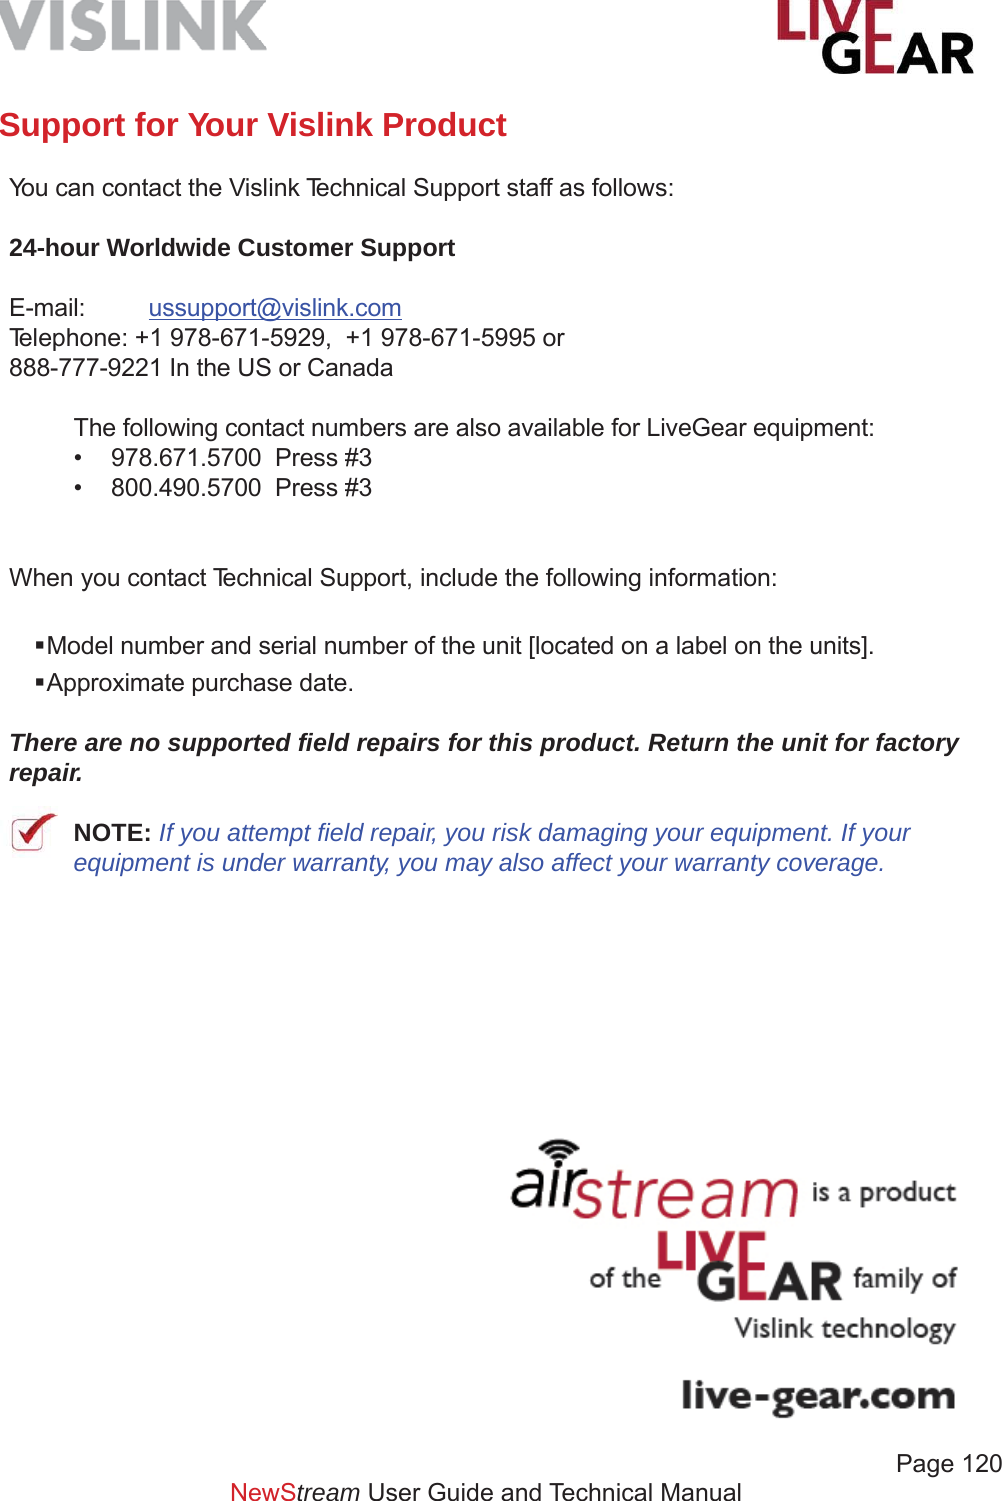             Page 120NewStream User Guide and Technical ManualSupport for Your Vislink Product You can contact the Vislink Technical Support staff as follows:24-hour Worldwide Customer SupportE-mail:  ussupport@vislink.comTelephone: +1 978-671-5929,  +1 978-671-5995 or888-777-9221 In the US or CanadaThe following contact numbers are also available for LiveGear equipment:•  978.671.5700  Press #3•  800.490.5700  Press #3When you contact Technical Support, include the following information: Model number and serial number of the unit [located on a label on the units]. Approximate purchase date.There are no supported ﬁ eld repairs for this product. Return the unit for factory repair.NOTE: If you attempt ﬁ eld repair, you risk damaging your equipment. If your equipment is under warranty, you may also affect your warranty coverage.